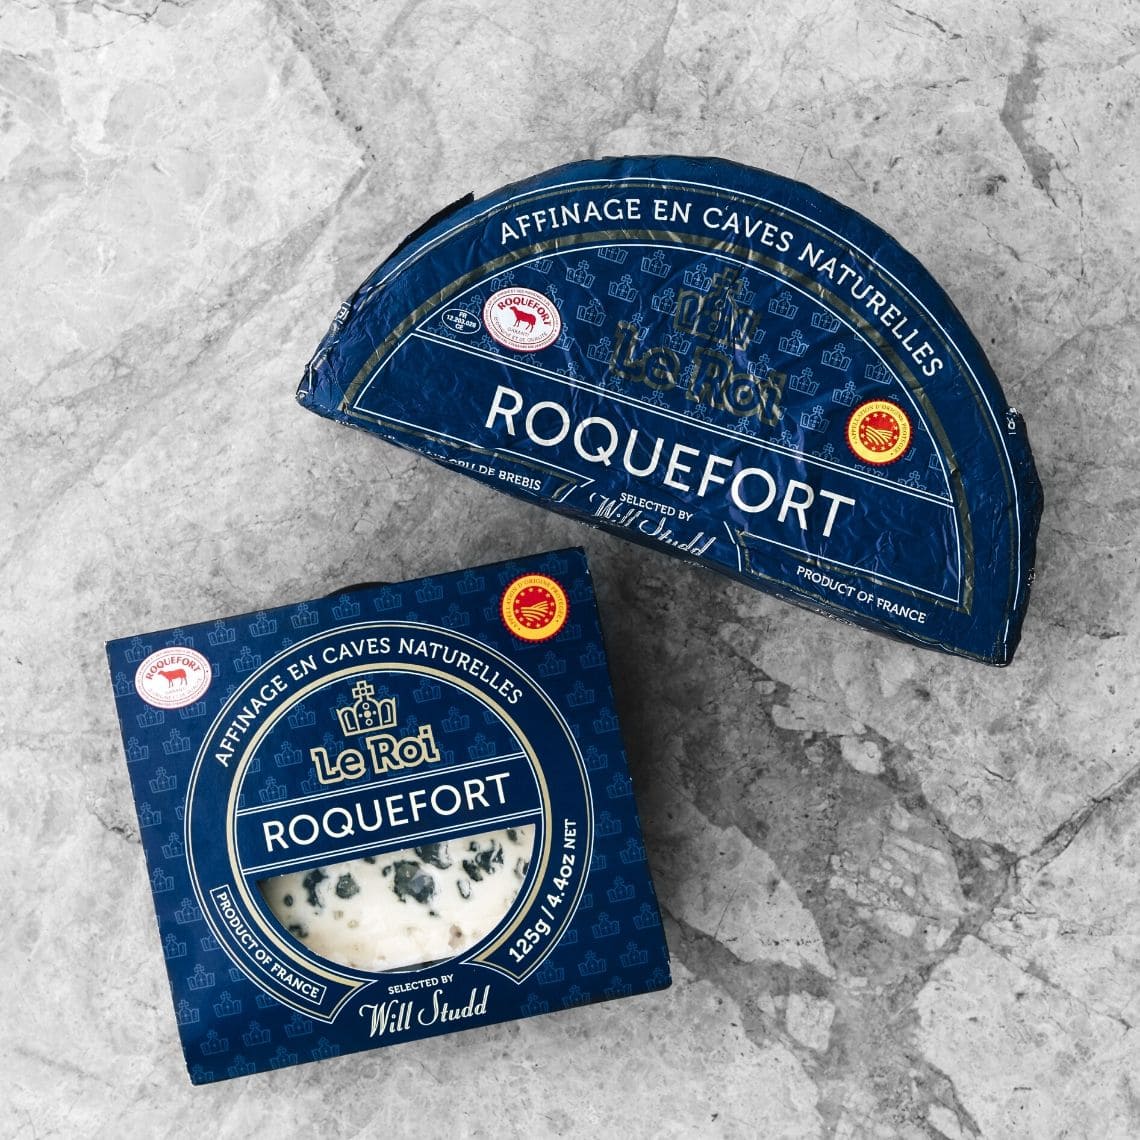 Le-Roi-Roquefort-Will-Studd-cheese